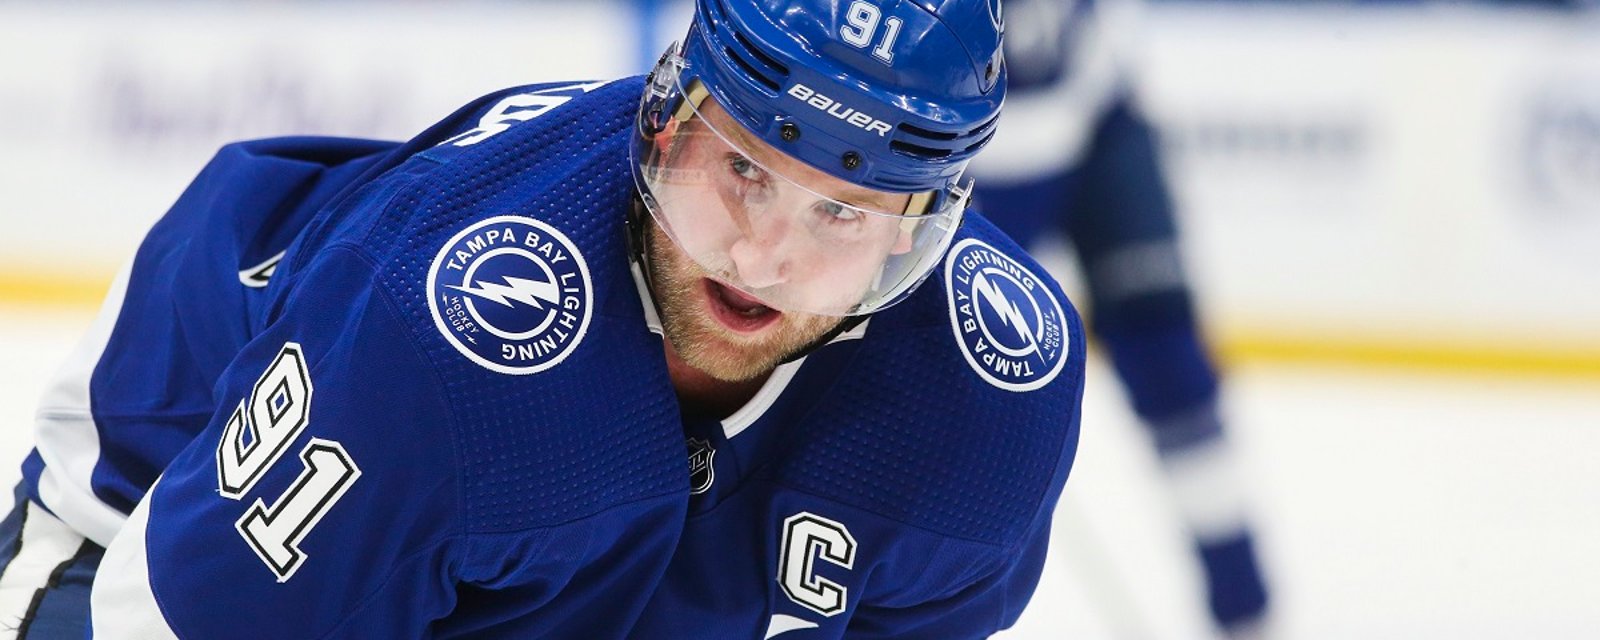 Rumor: The Lightning have tried to trade Steven Stamkos.